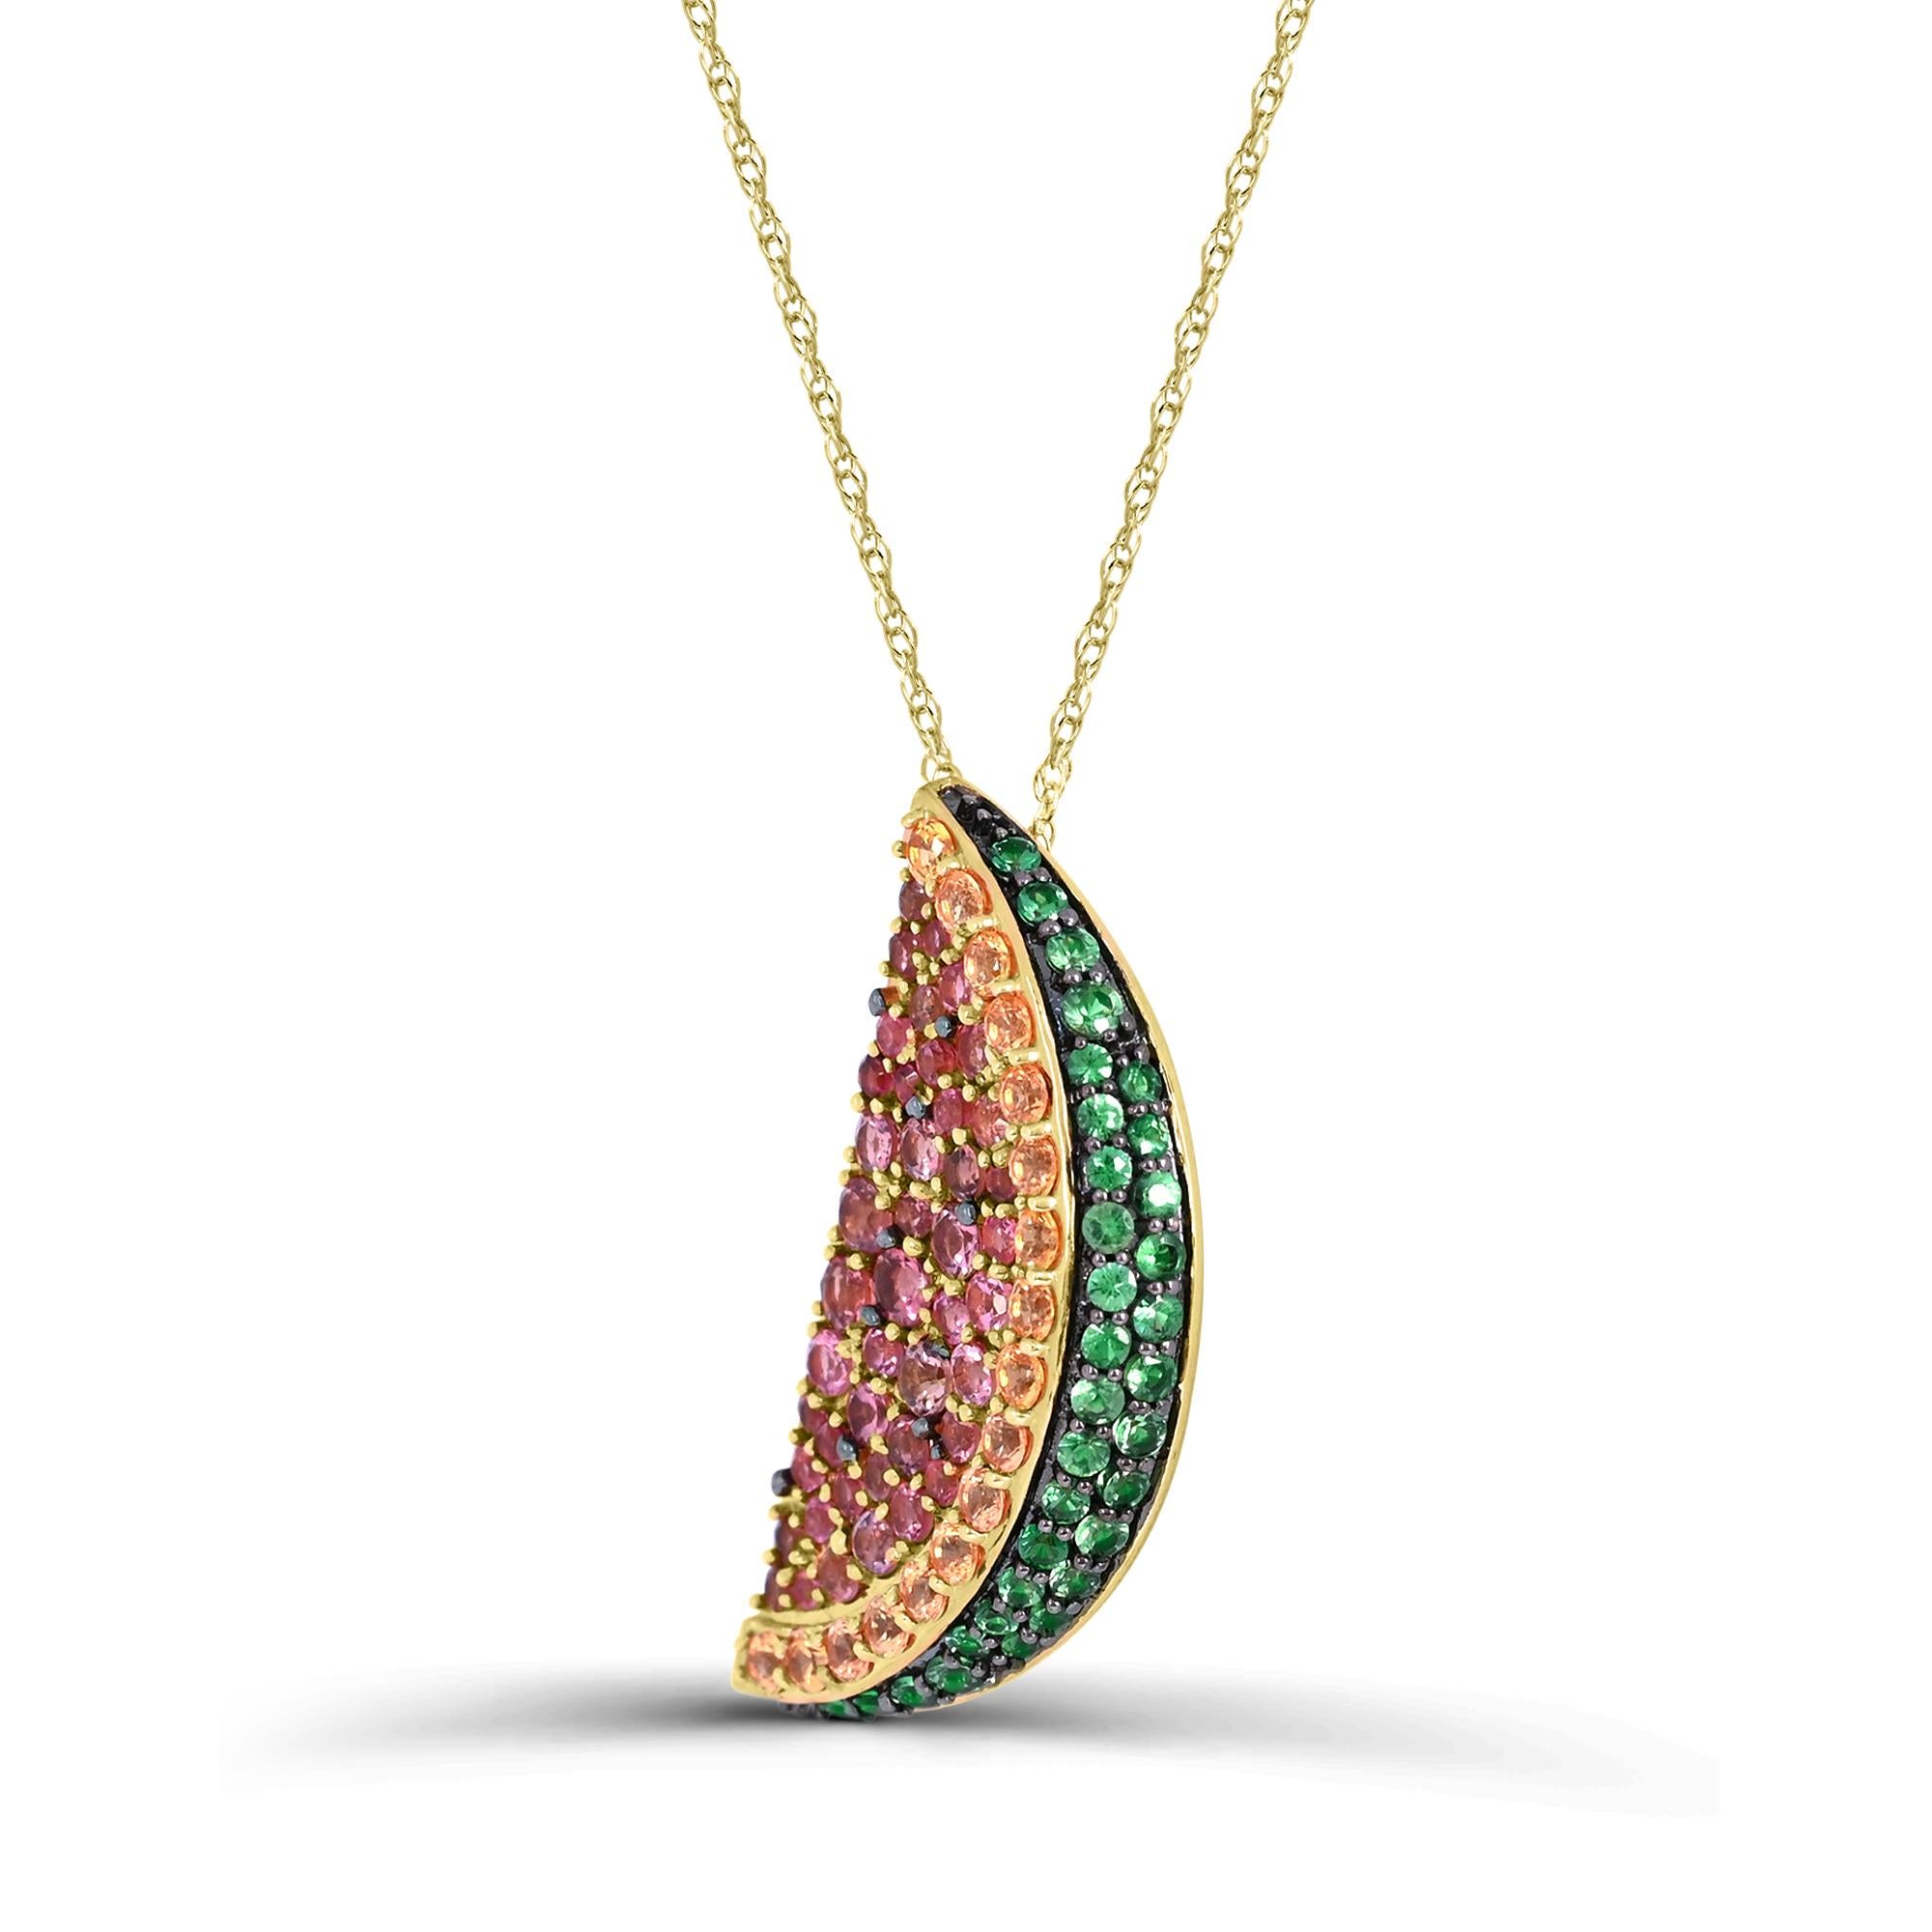 Indulge in the adorable design of our Pink Tourmaline, Yellow Sapphire and Tsavorite Water Melon Pendant Necklace in 14K Yellow Gold. Crafted with meticulous attention to detail, this necklace boasts a stunning combination of round pink tourmalines,